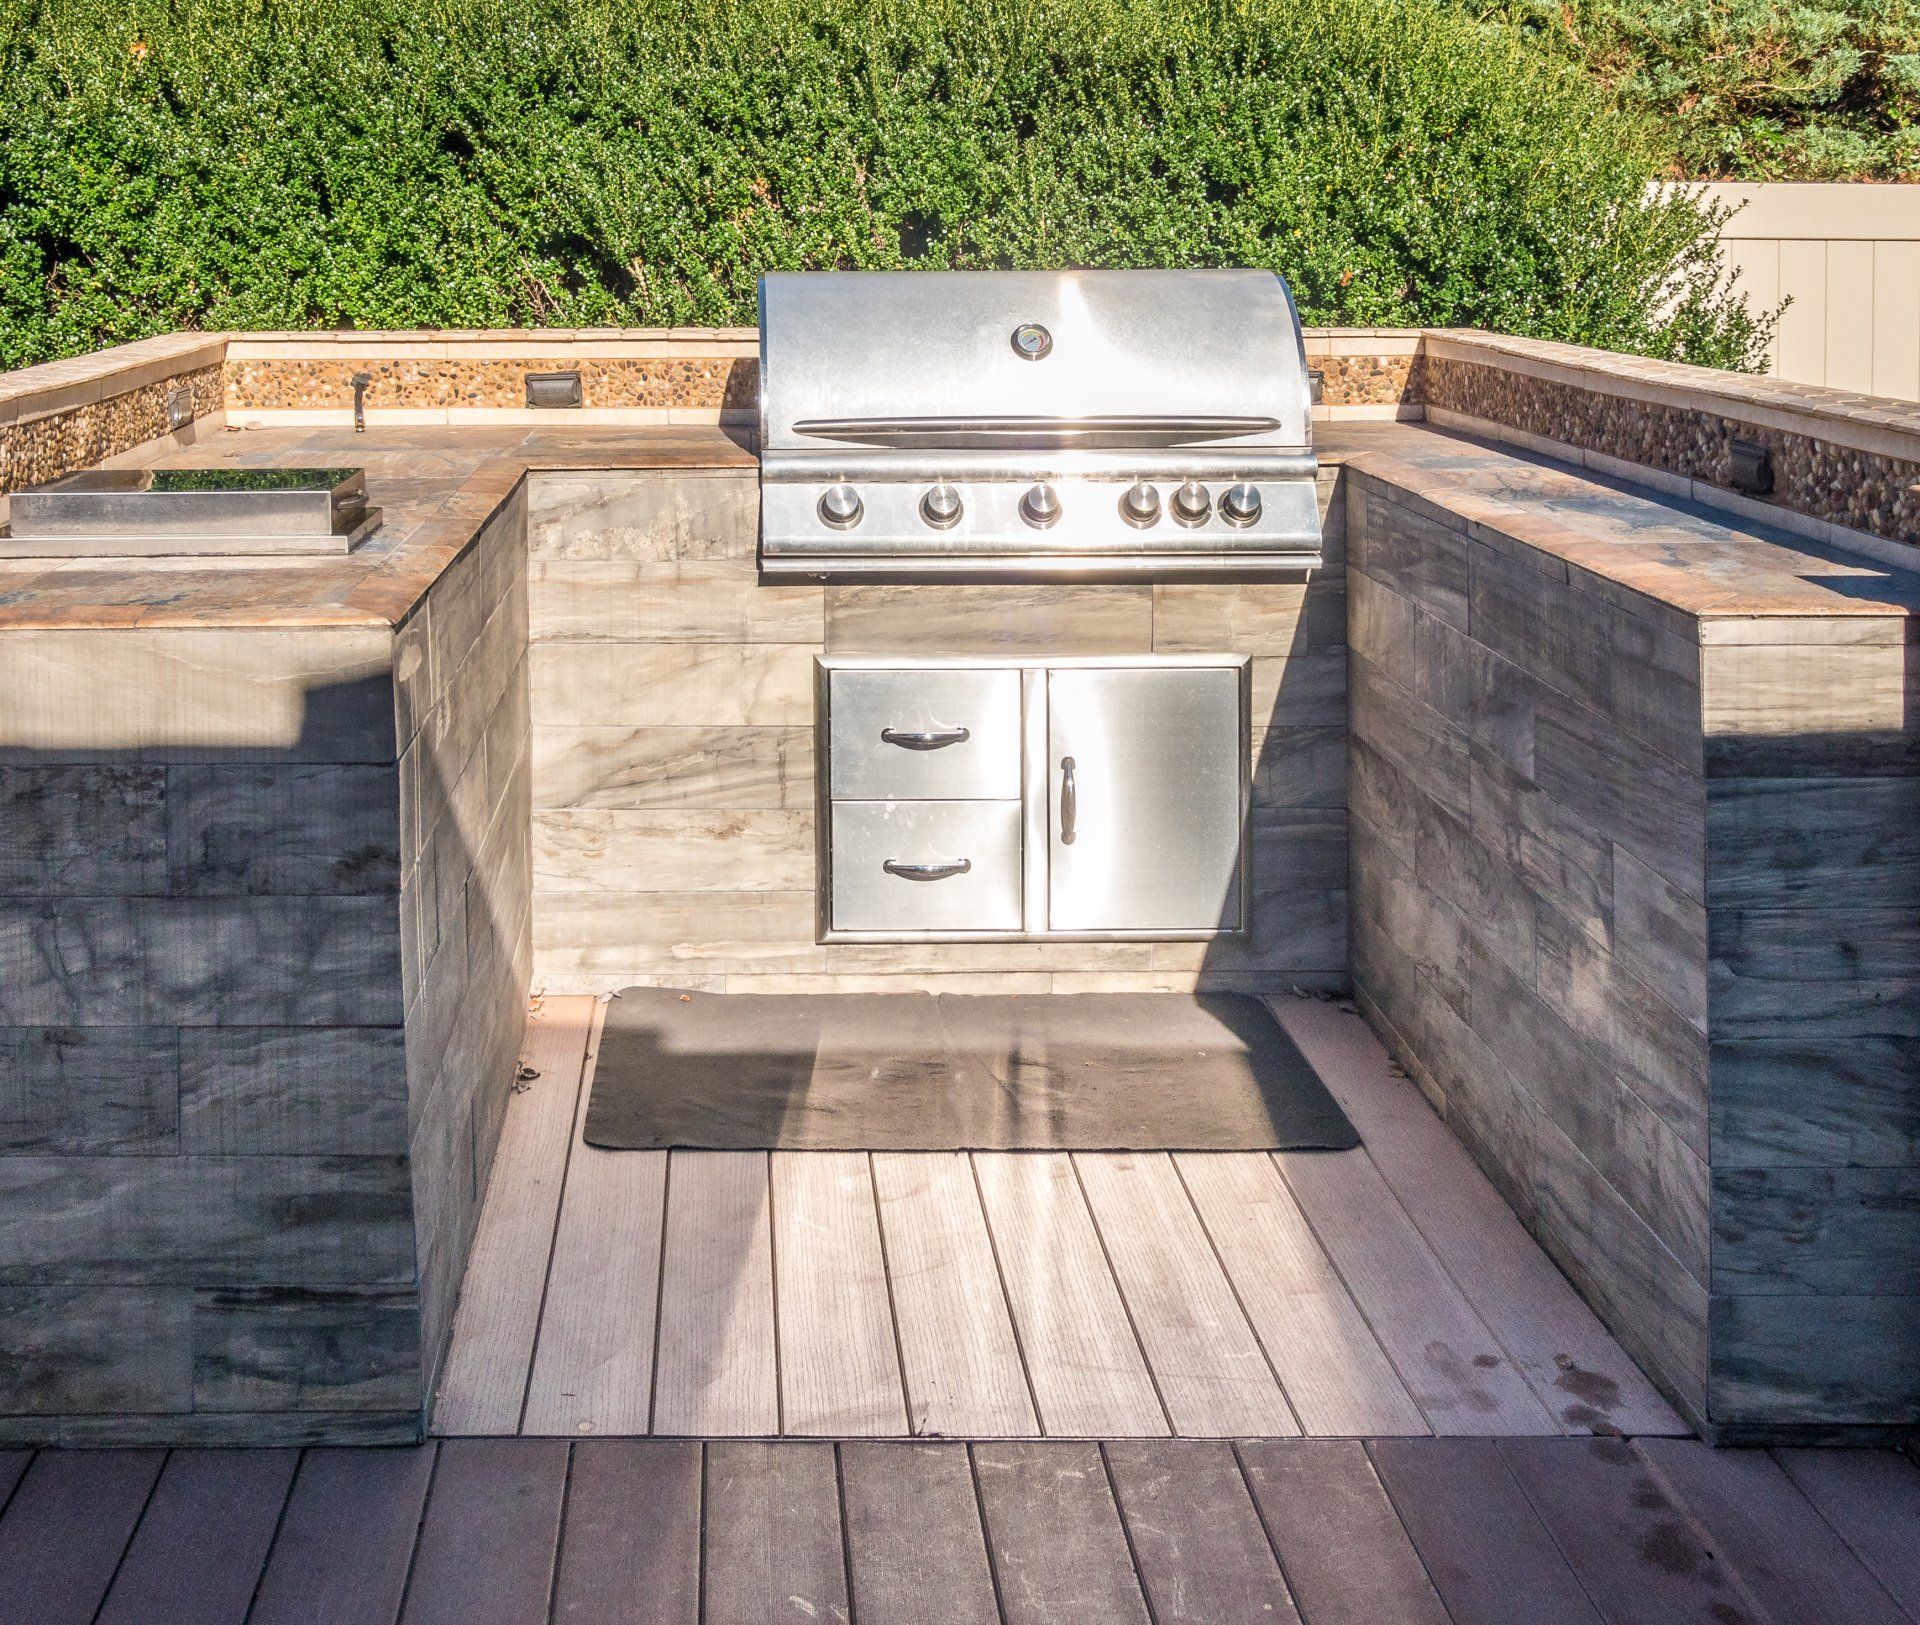 Residential Outdoor Kitchen with Built-in Grill